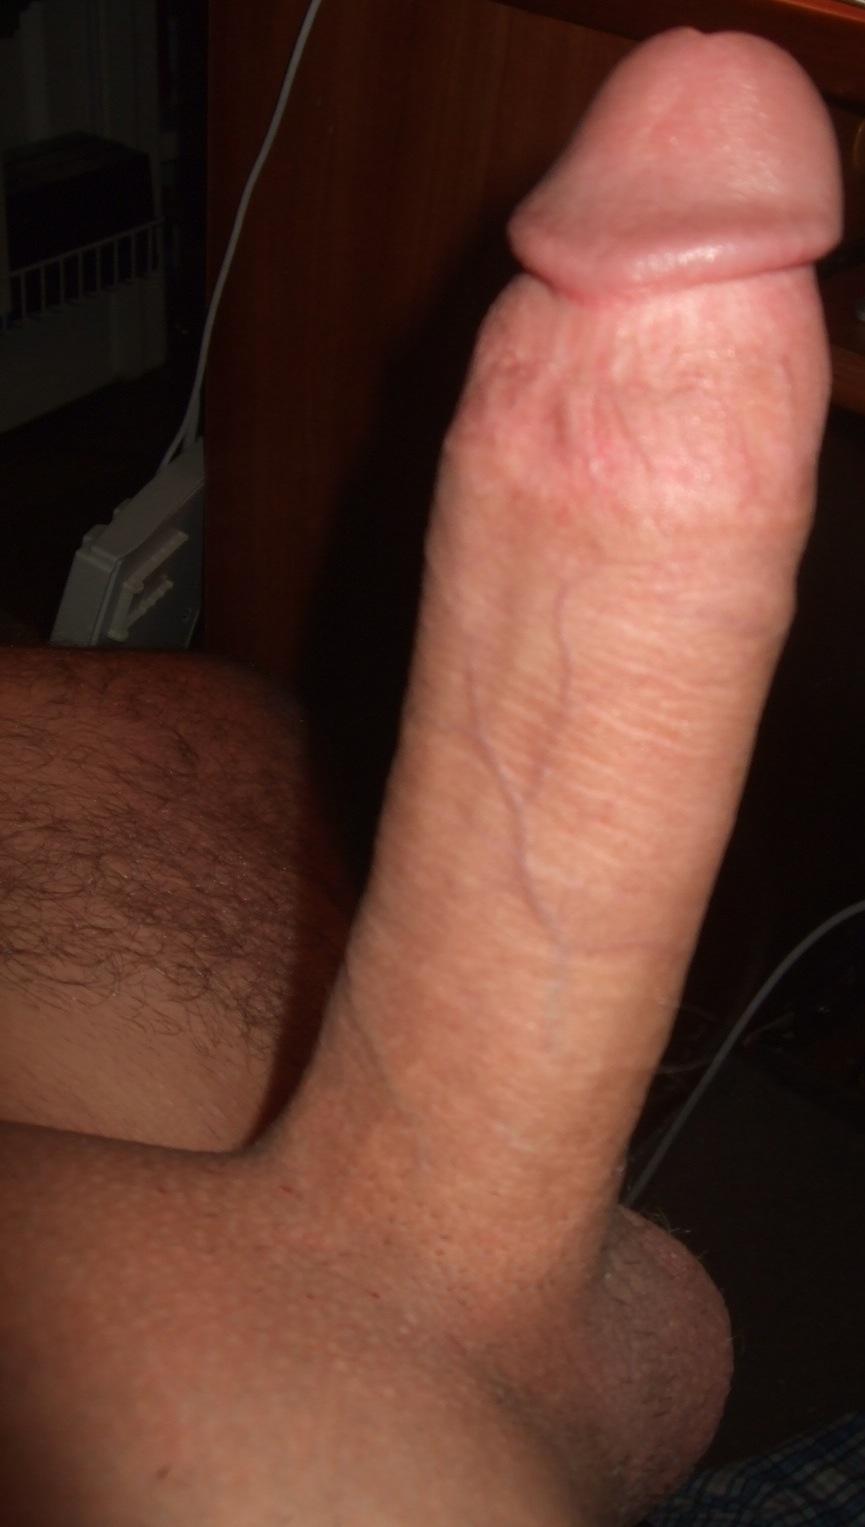 Lumber reccomend amateur with dick